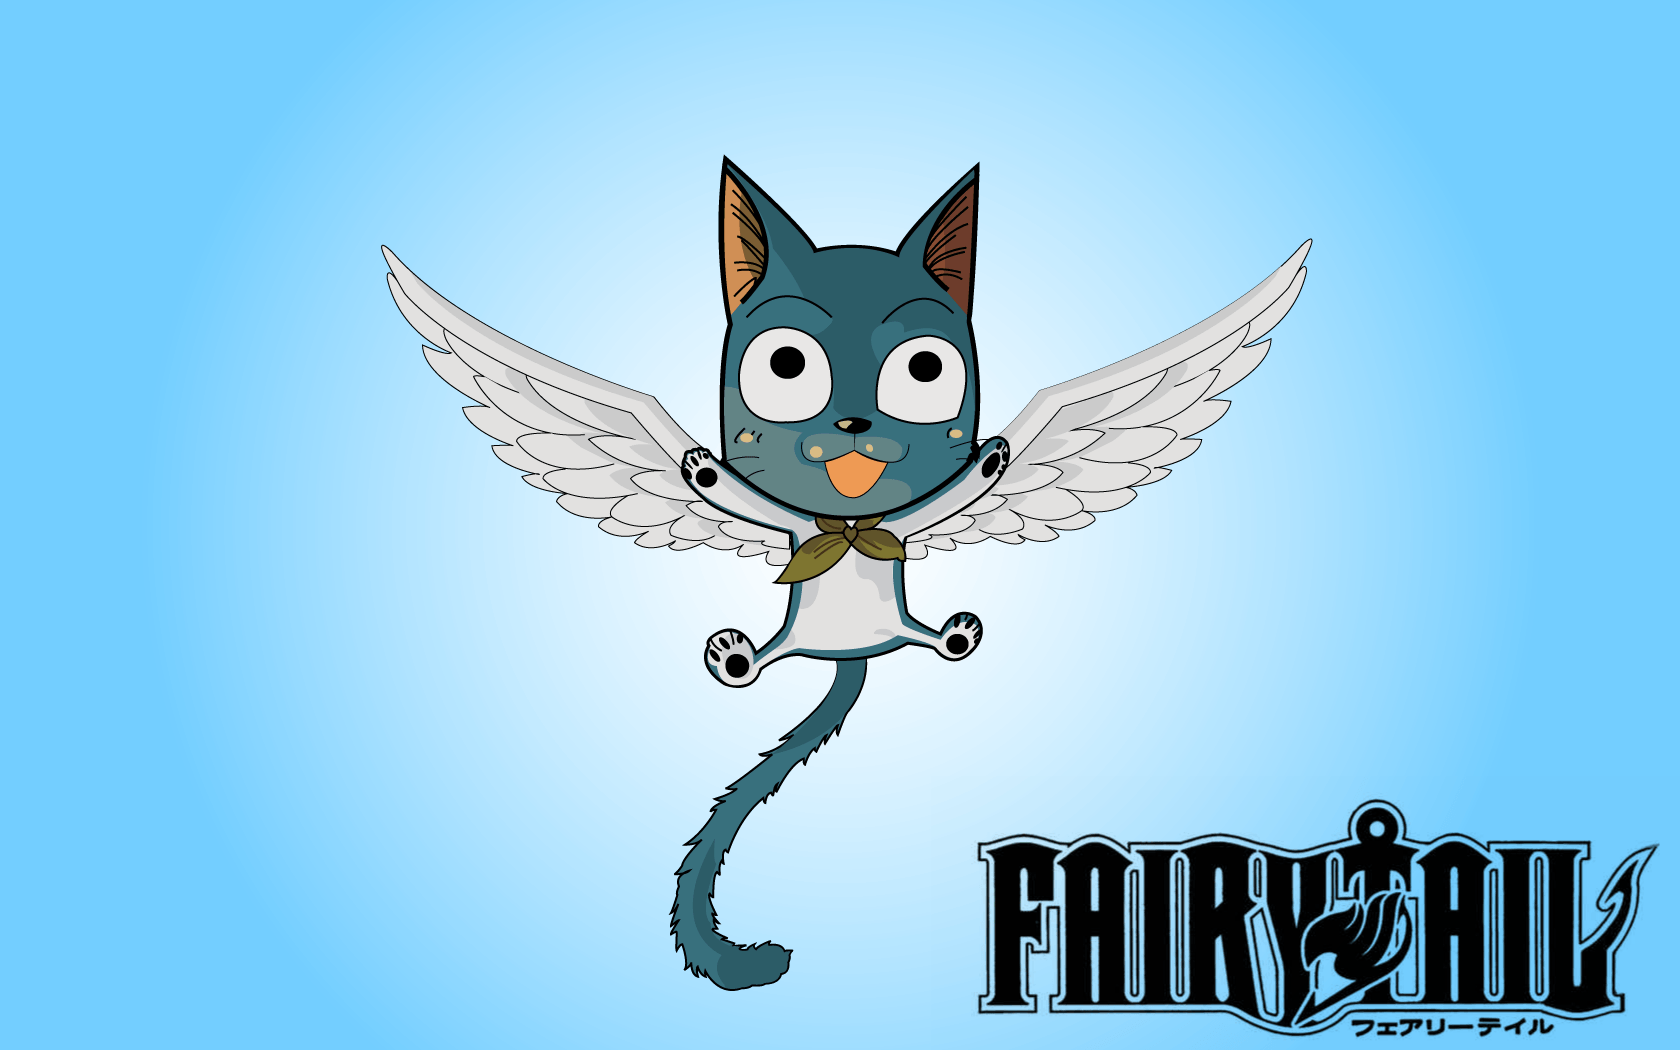 Wallpaper For > Fairy Tail Wallpaper Happy